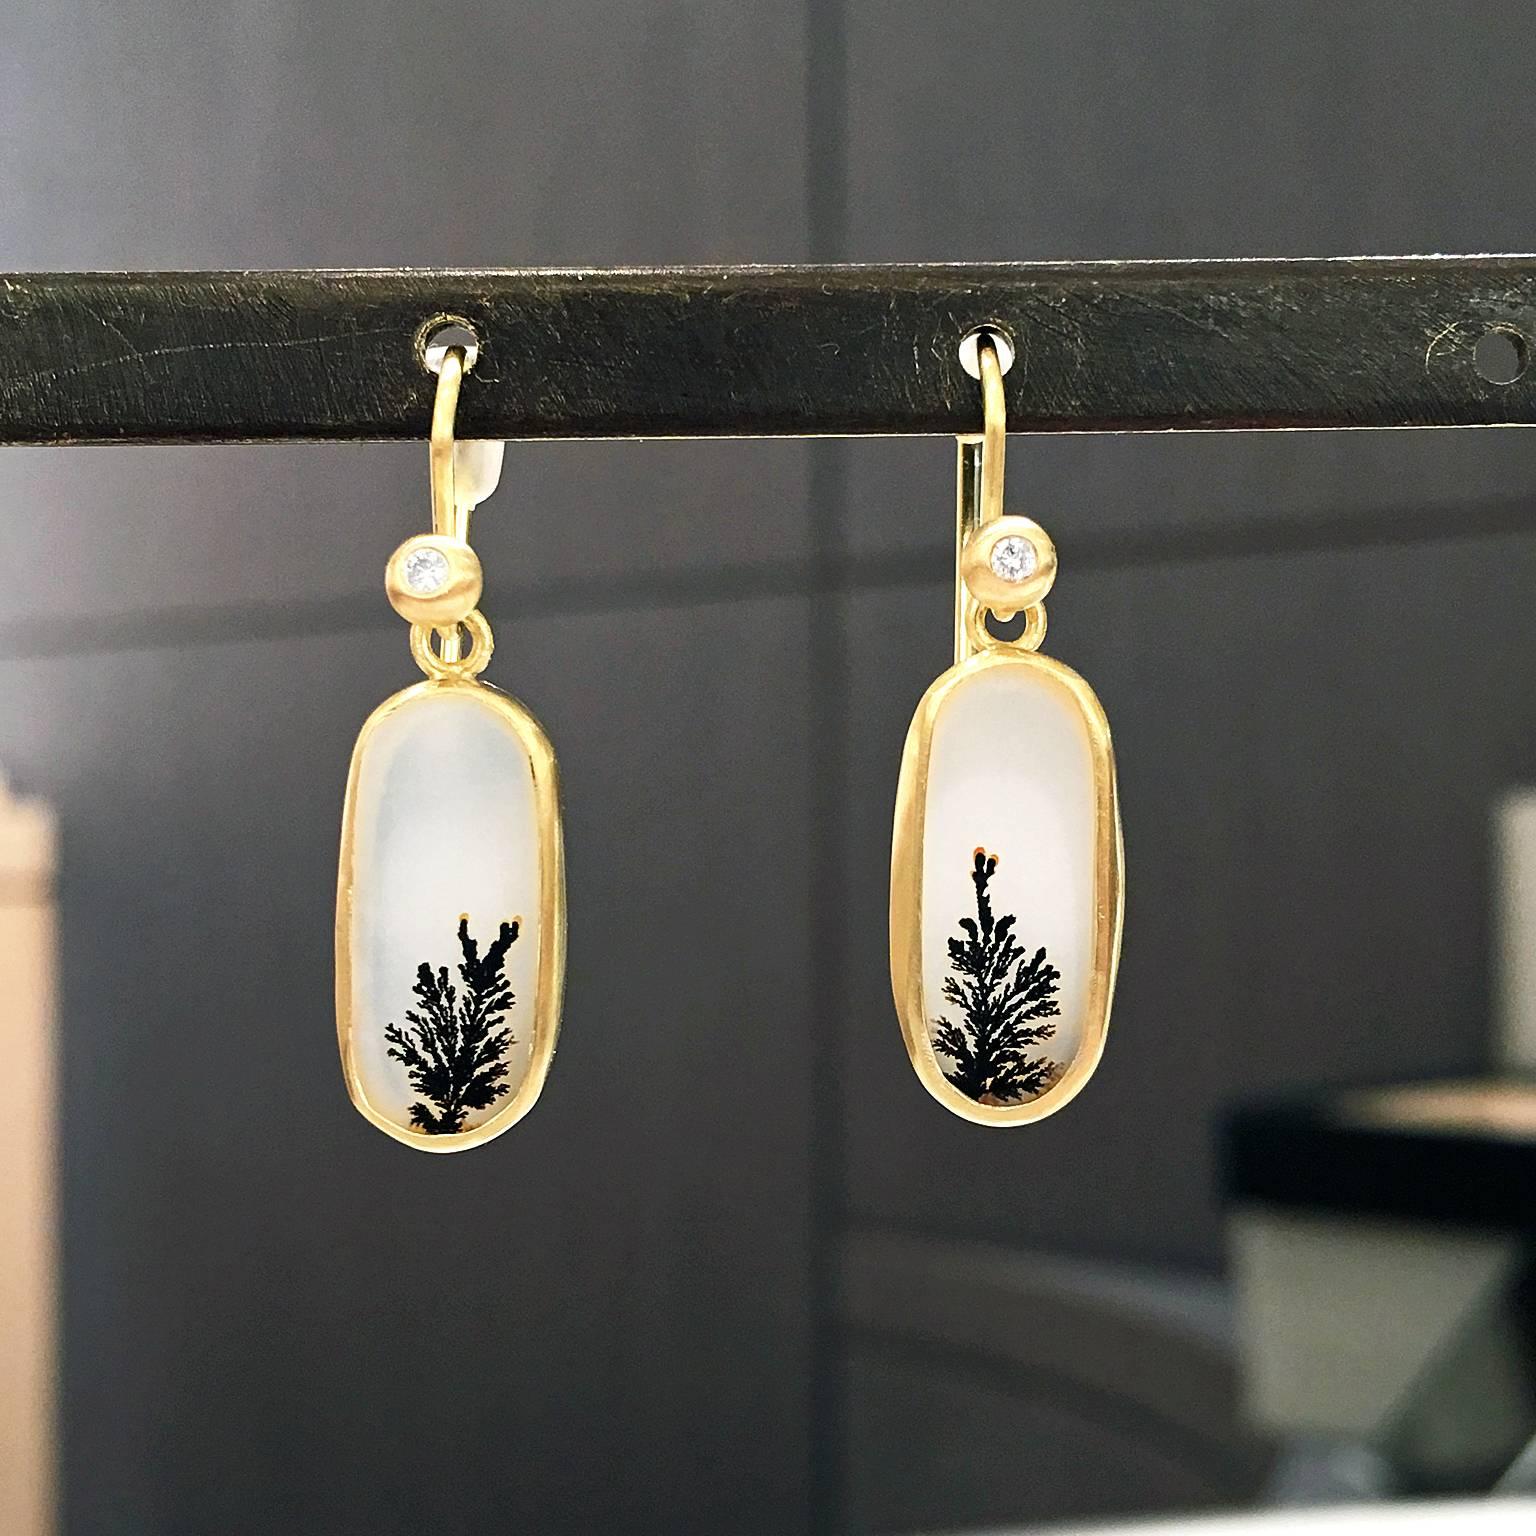 One of a Kind Dangle Earrings handcrafted in matte-finished 18k yellow gold showcasing a matched pair of translucent white and black dendrite agate, and accented by two round brilliant-cut white diamondss attached to 18k yellow gold ear wires.